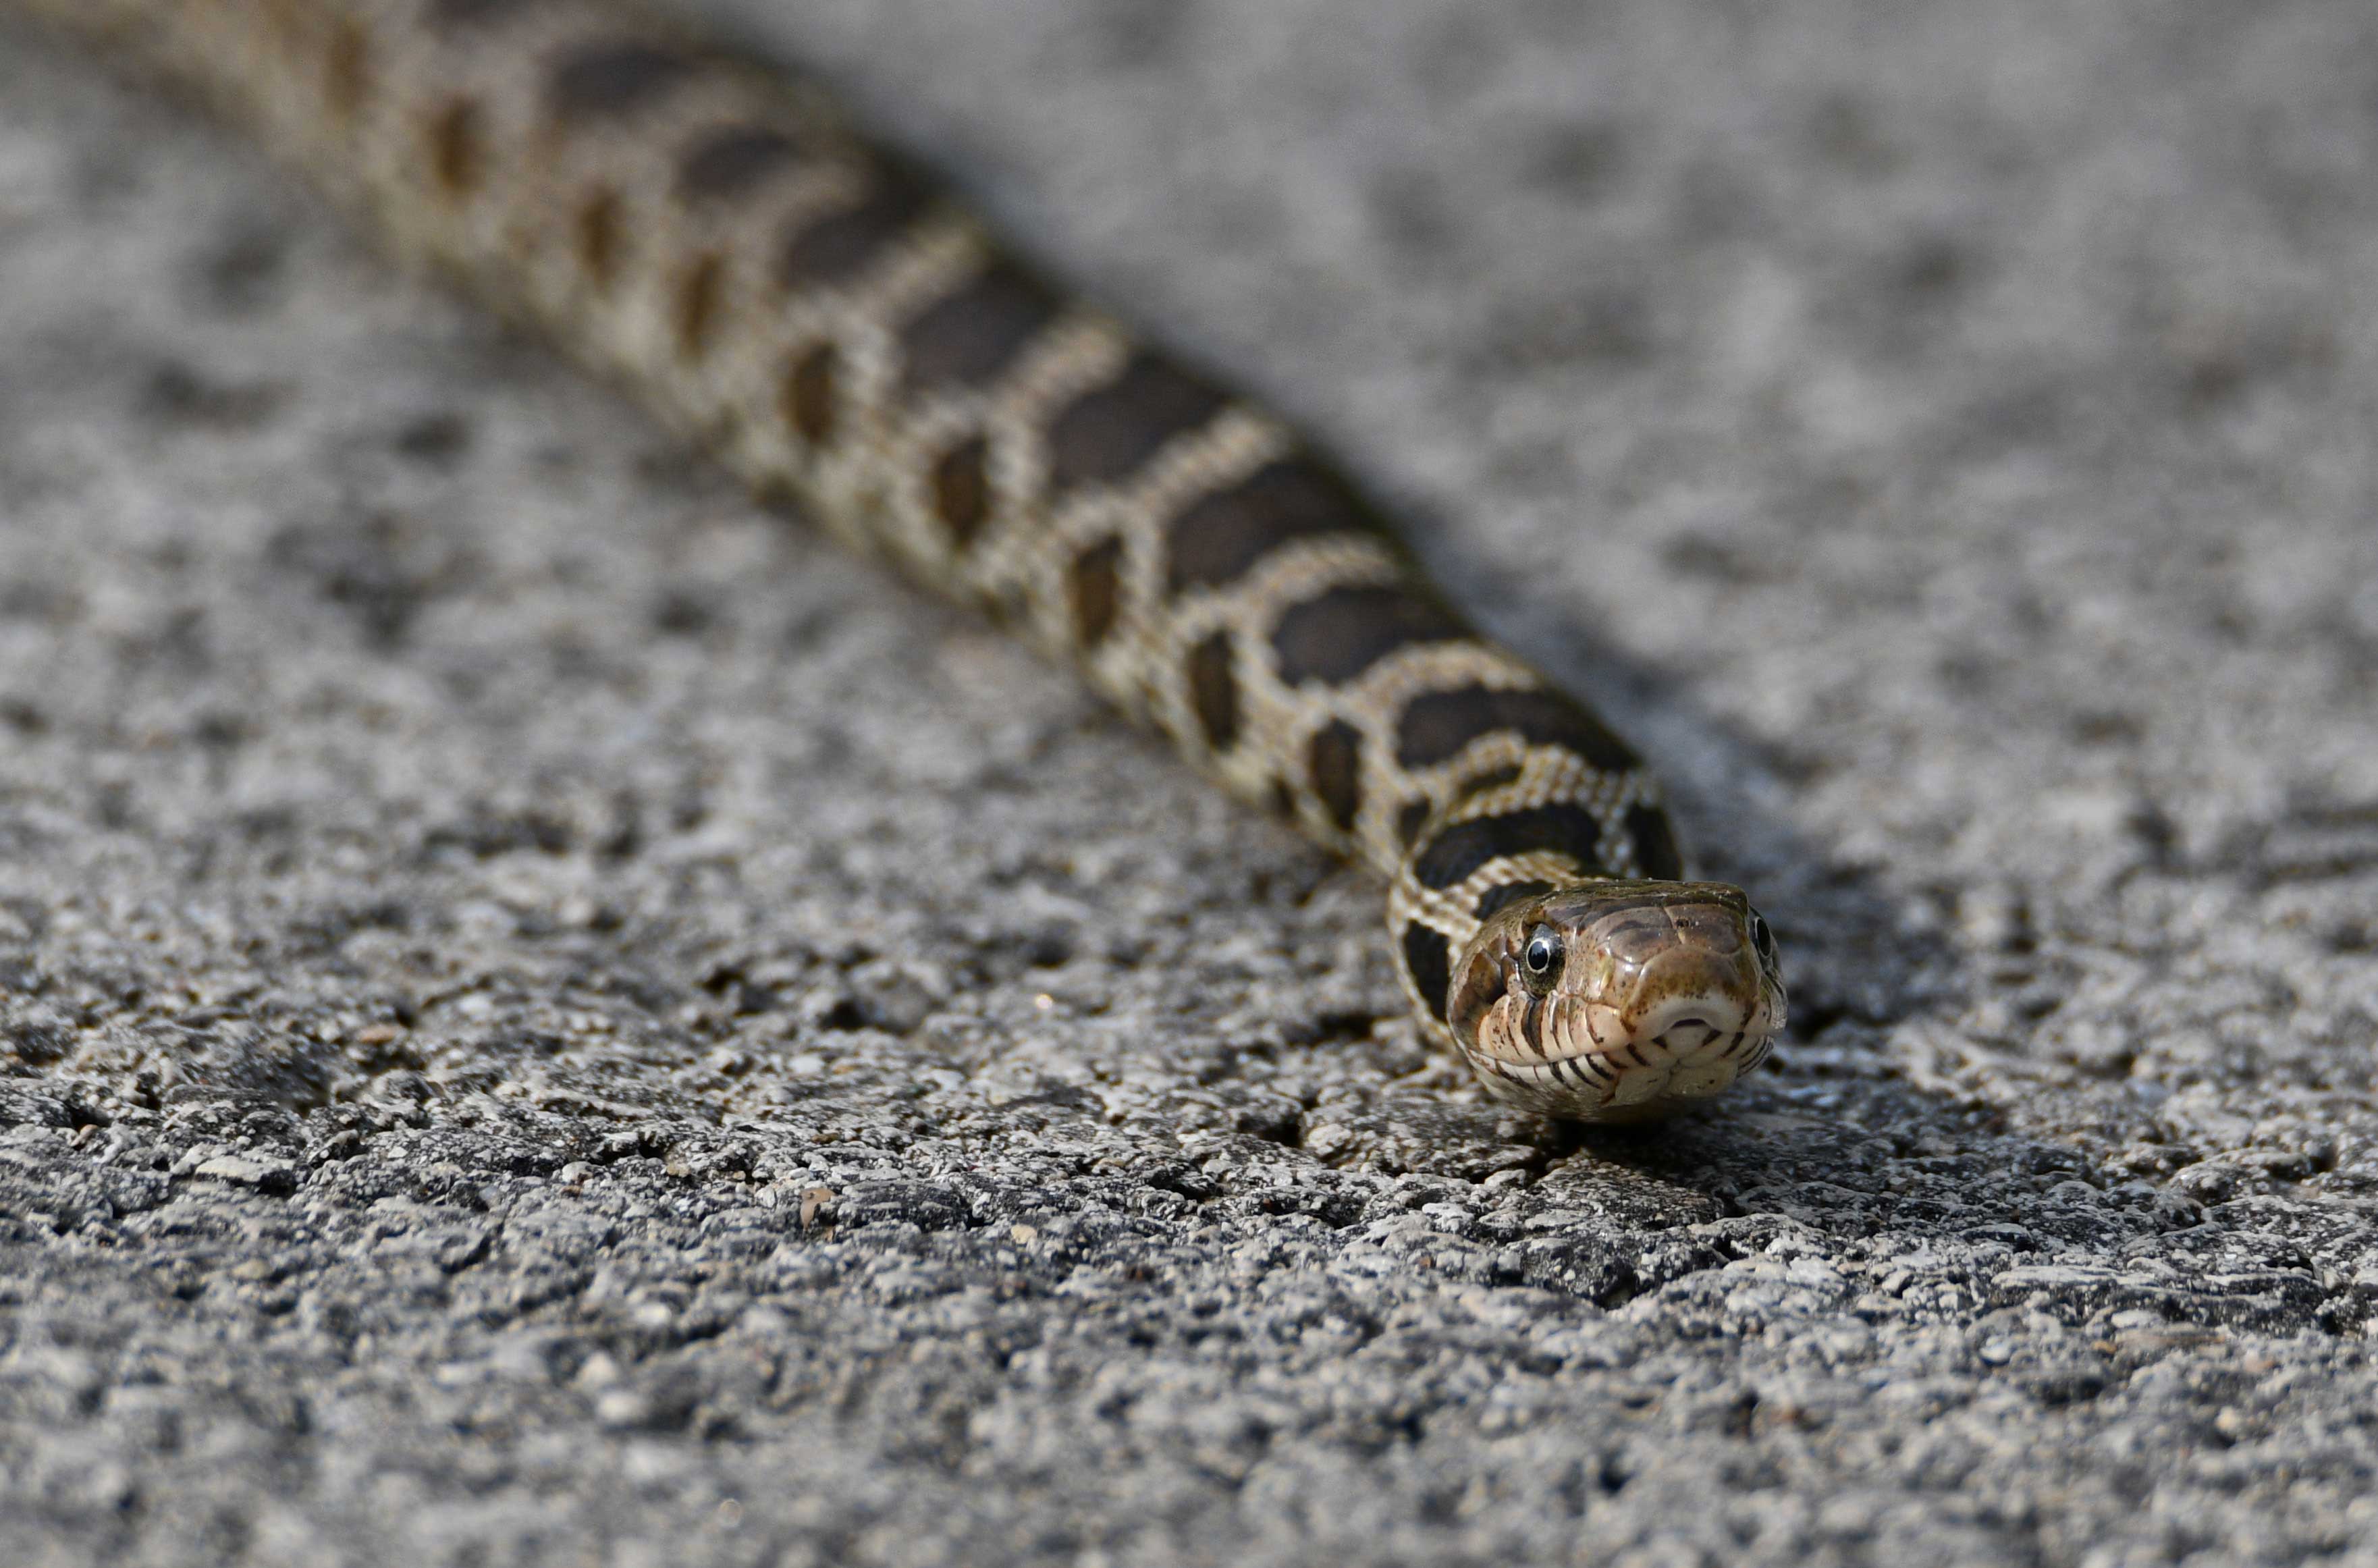 A fox snake slithering towards the camera.